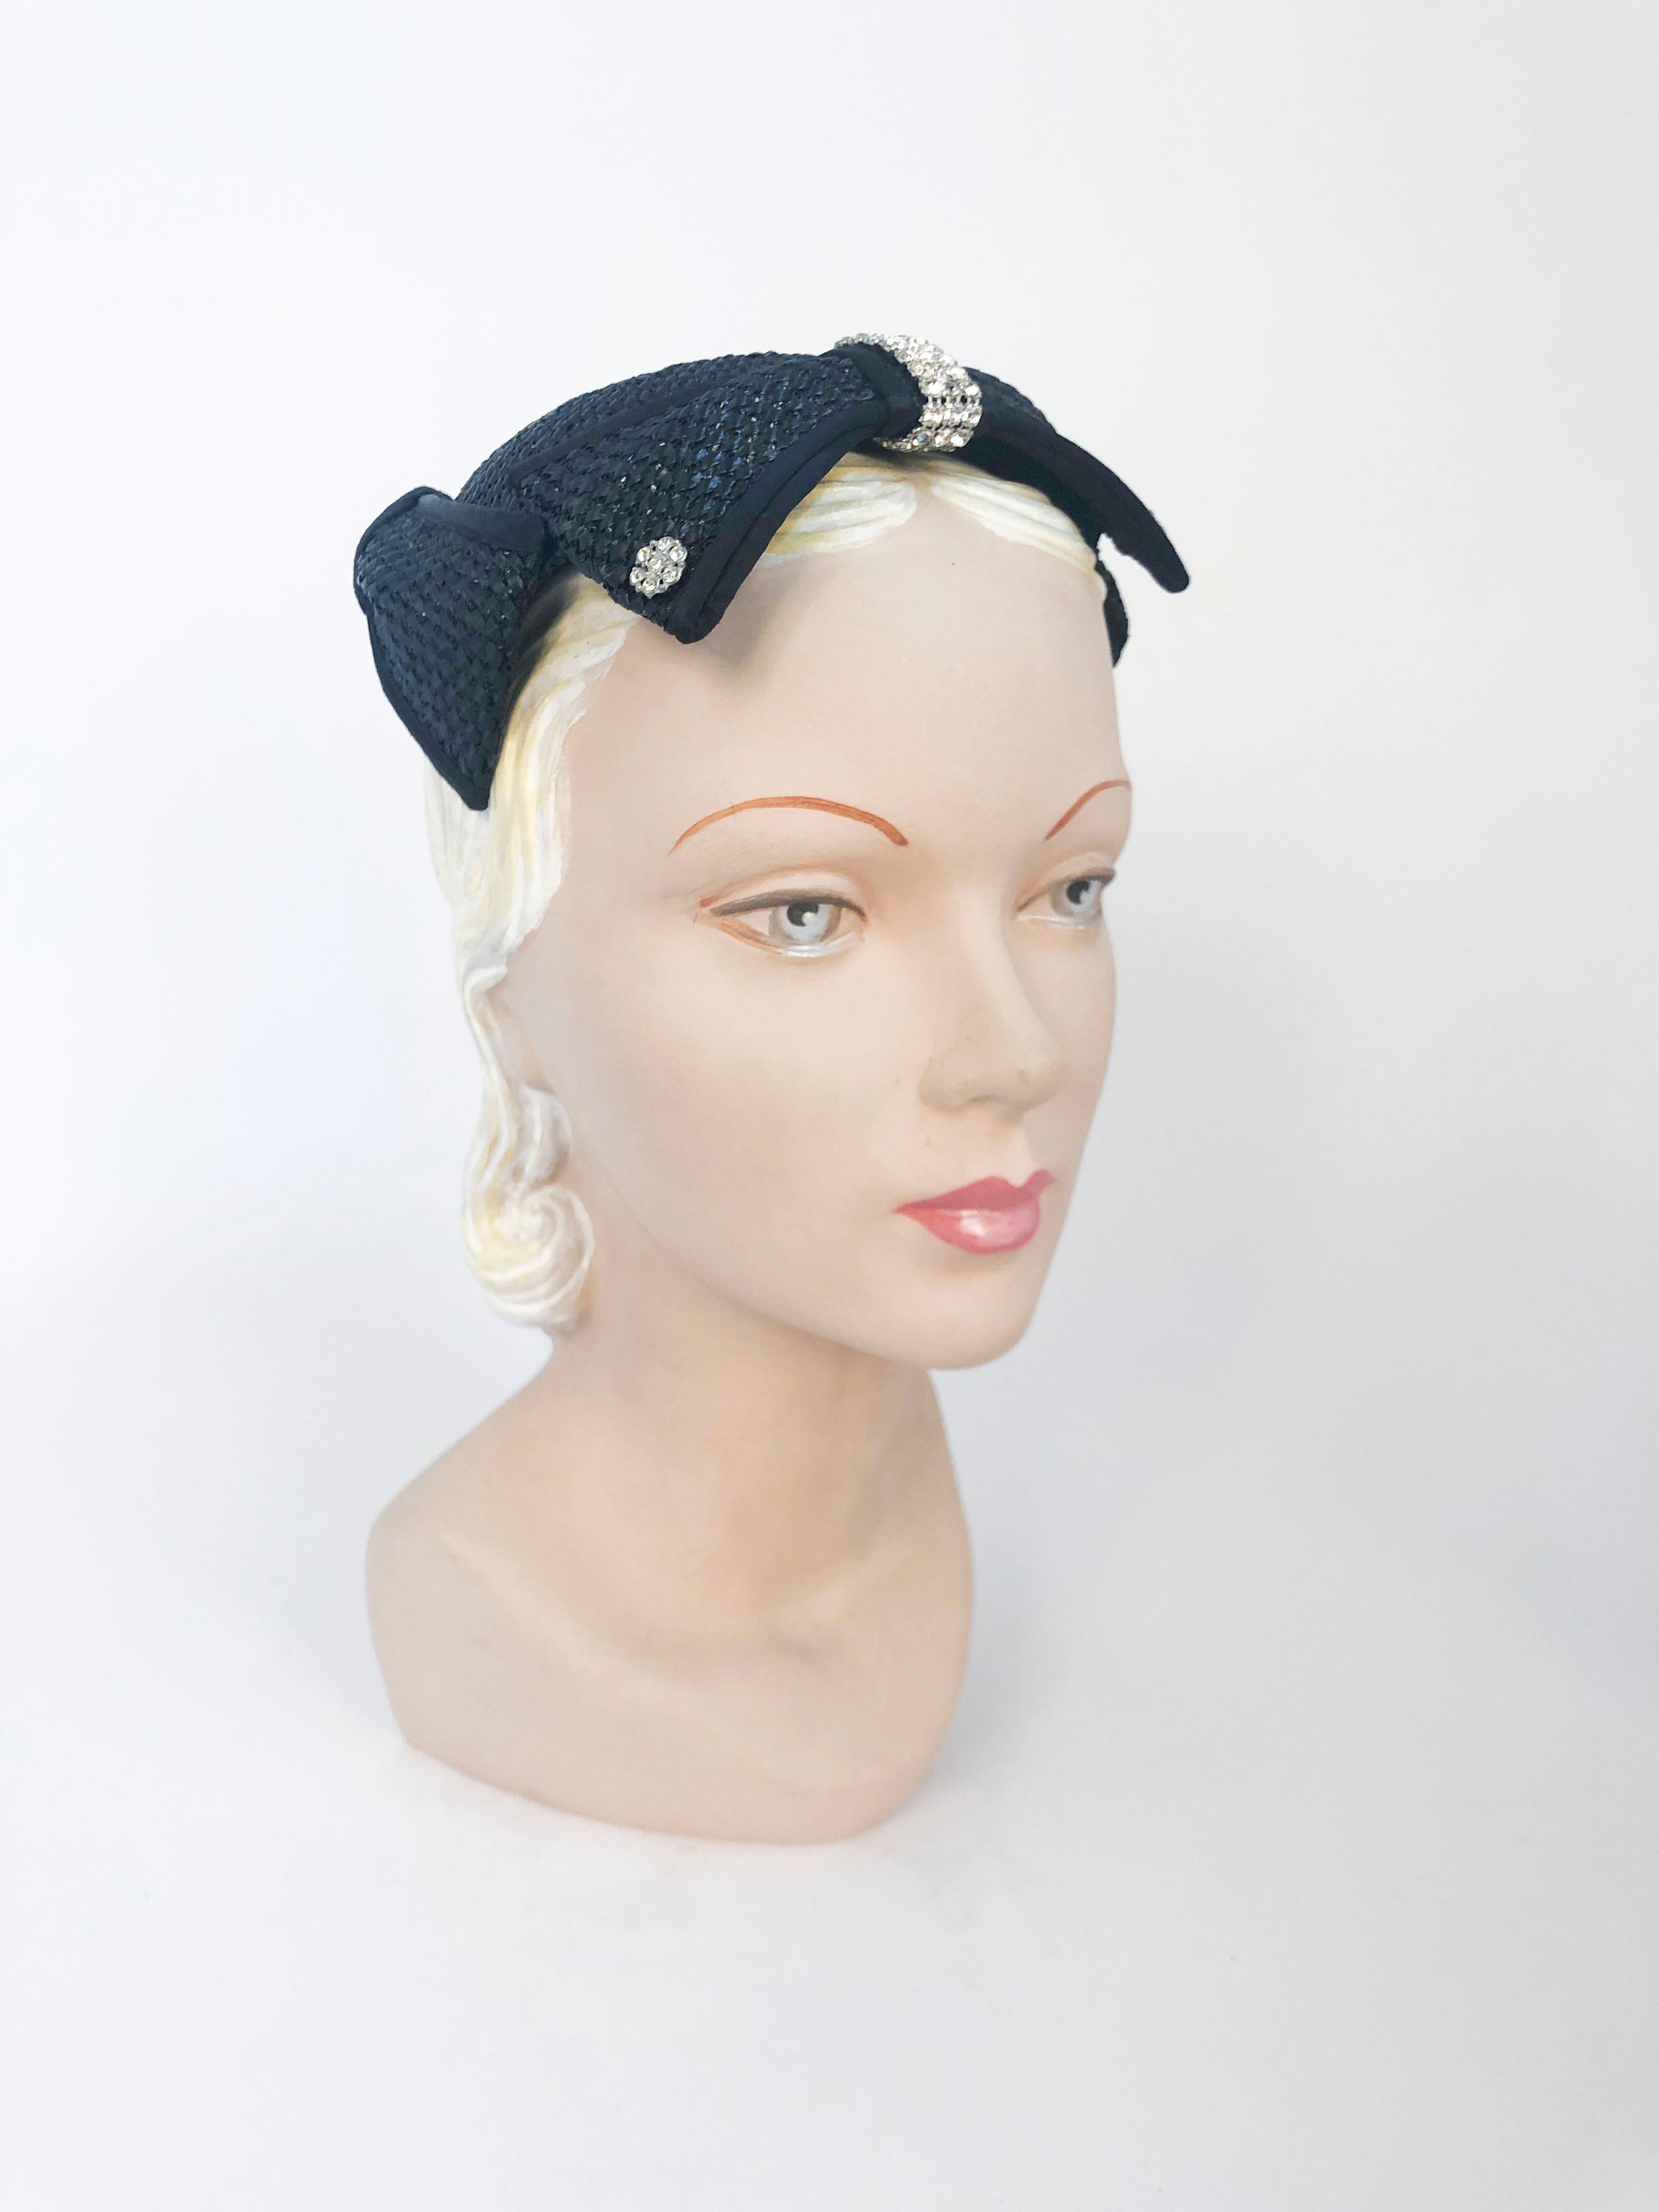 1950s Navy cocktail hat made of a woven raffia and is outlined in three oversized bows that are also trimmed with satin. The front bow has two rhinestone buttons, and a strip of rhinestone to accent the shape.